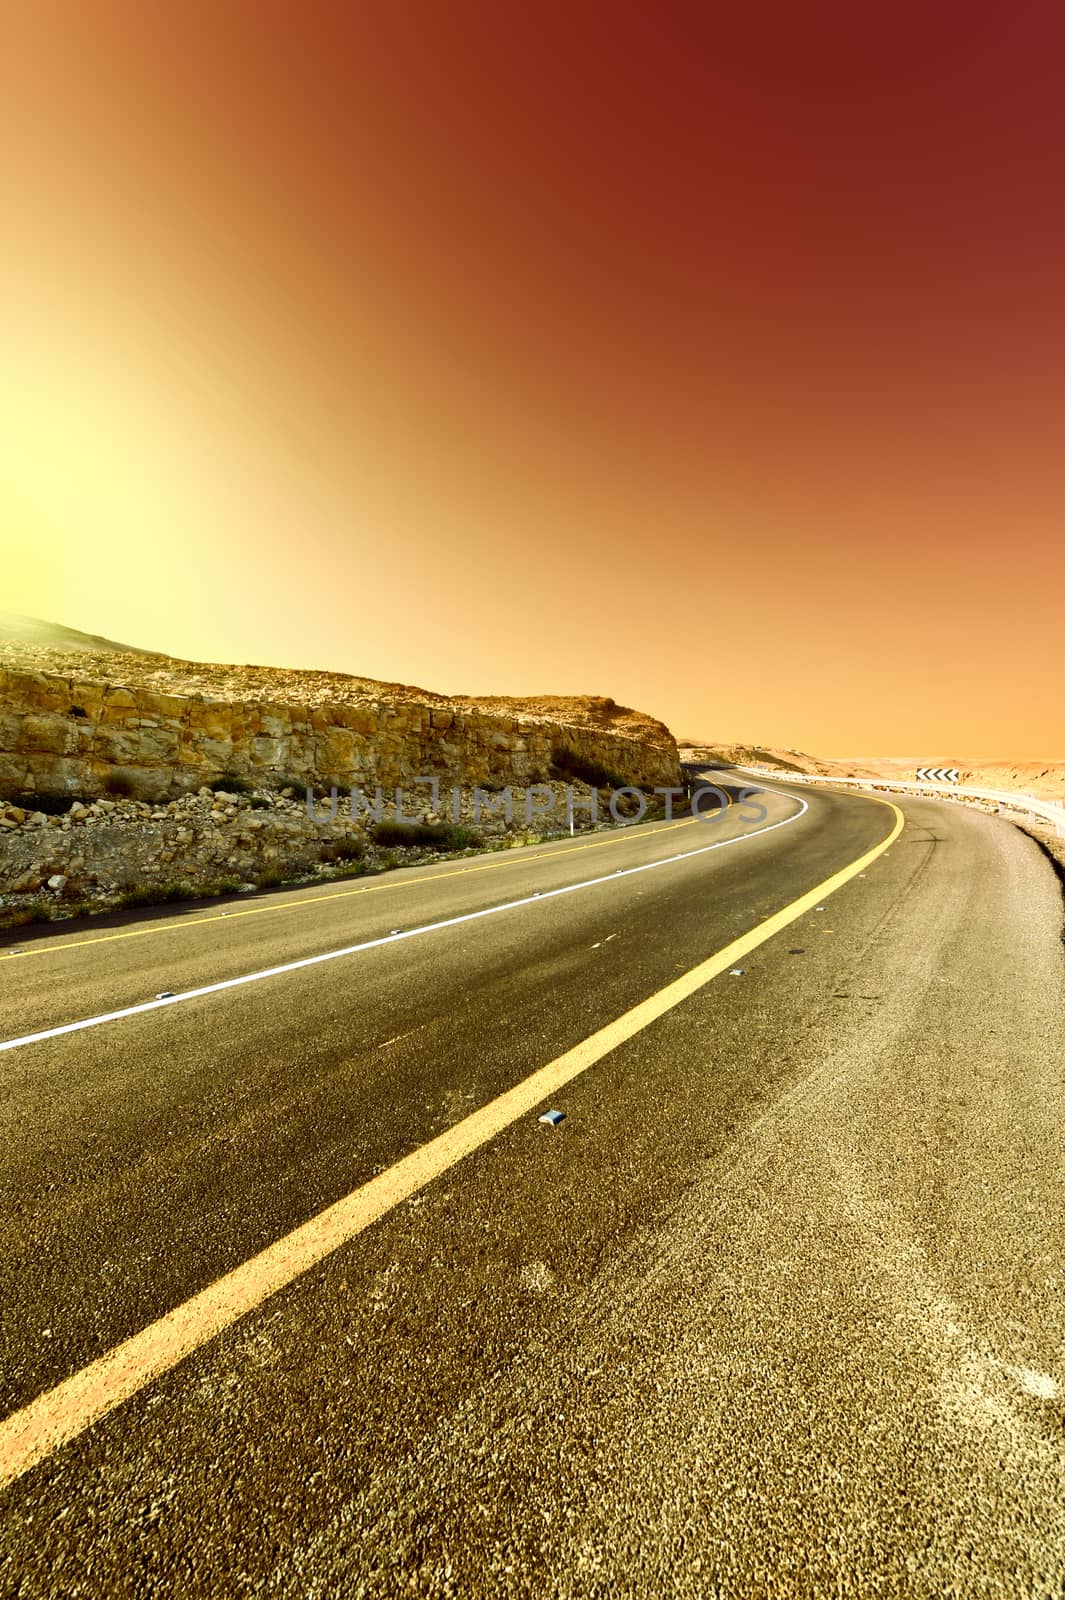 Asphalt Road in the Judean Desert on the West Bank at Sunset, Vintage Style Toned Picture 